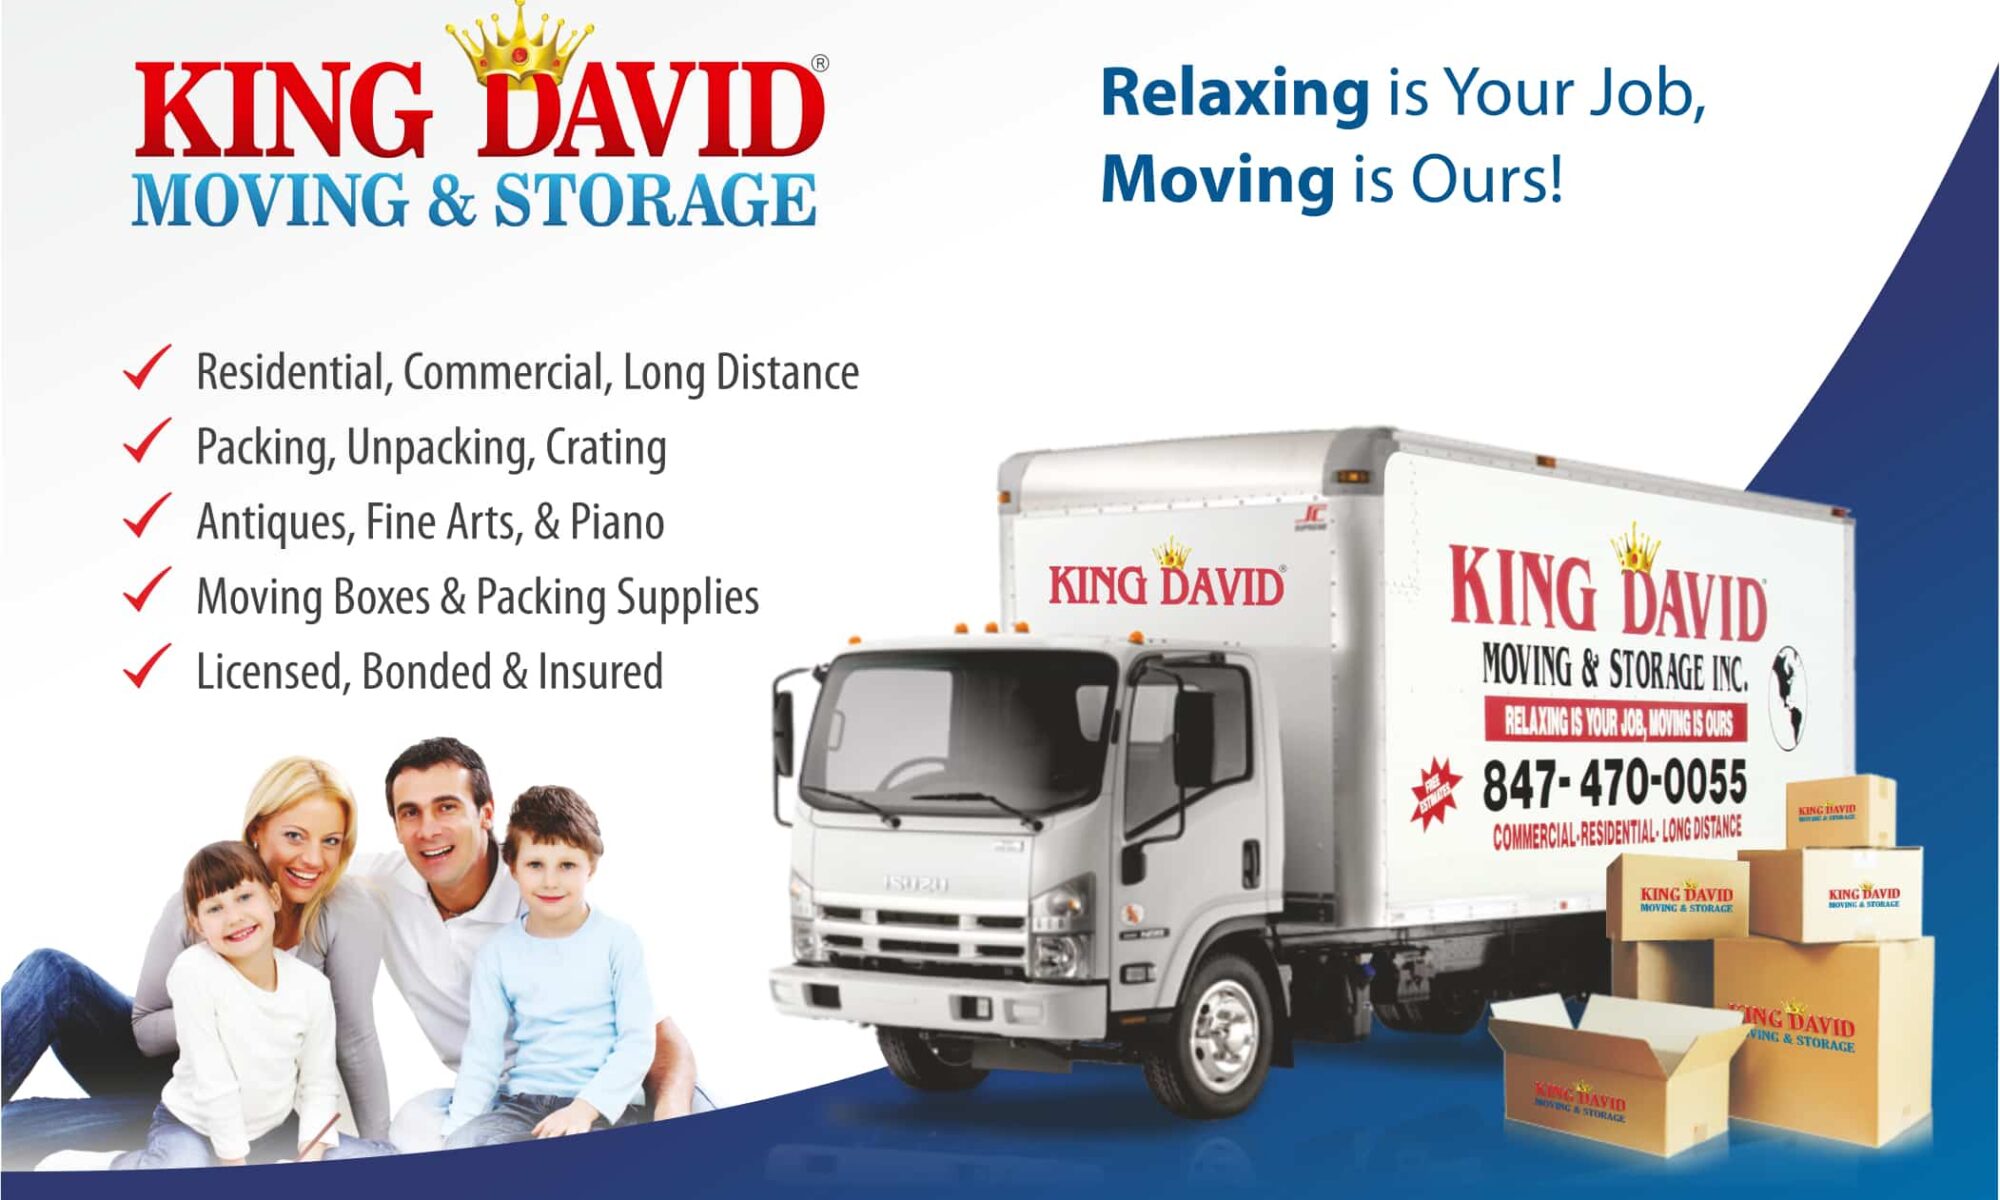 professional moving company in Chicago, that provides residential and commercial moving services